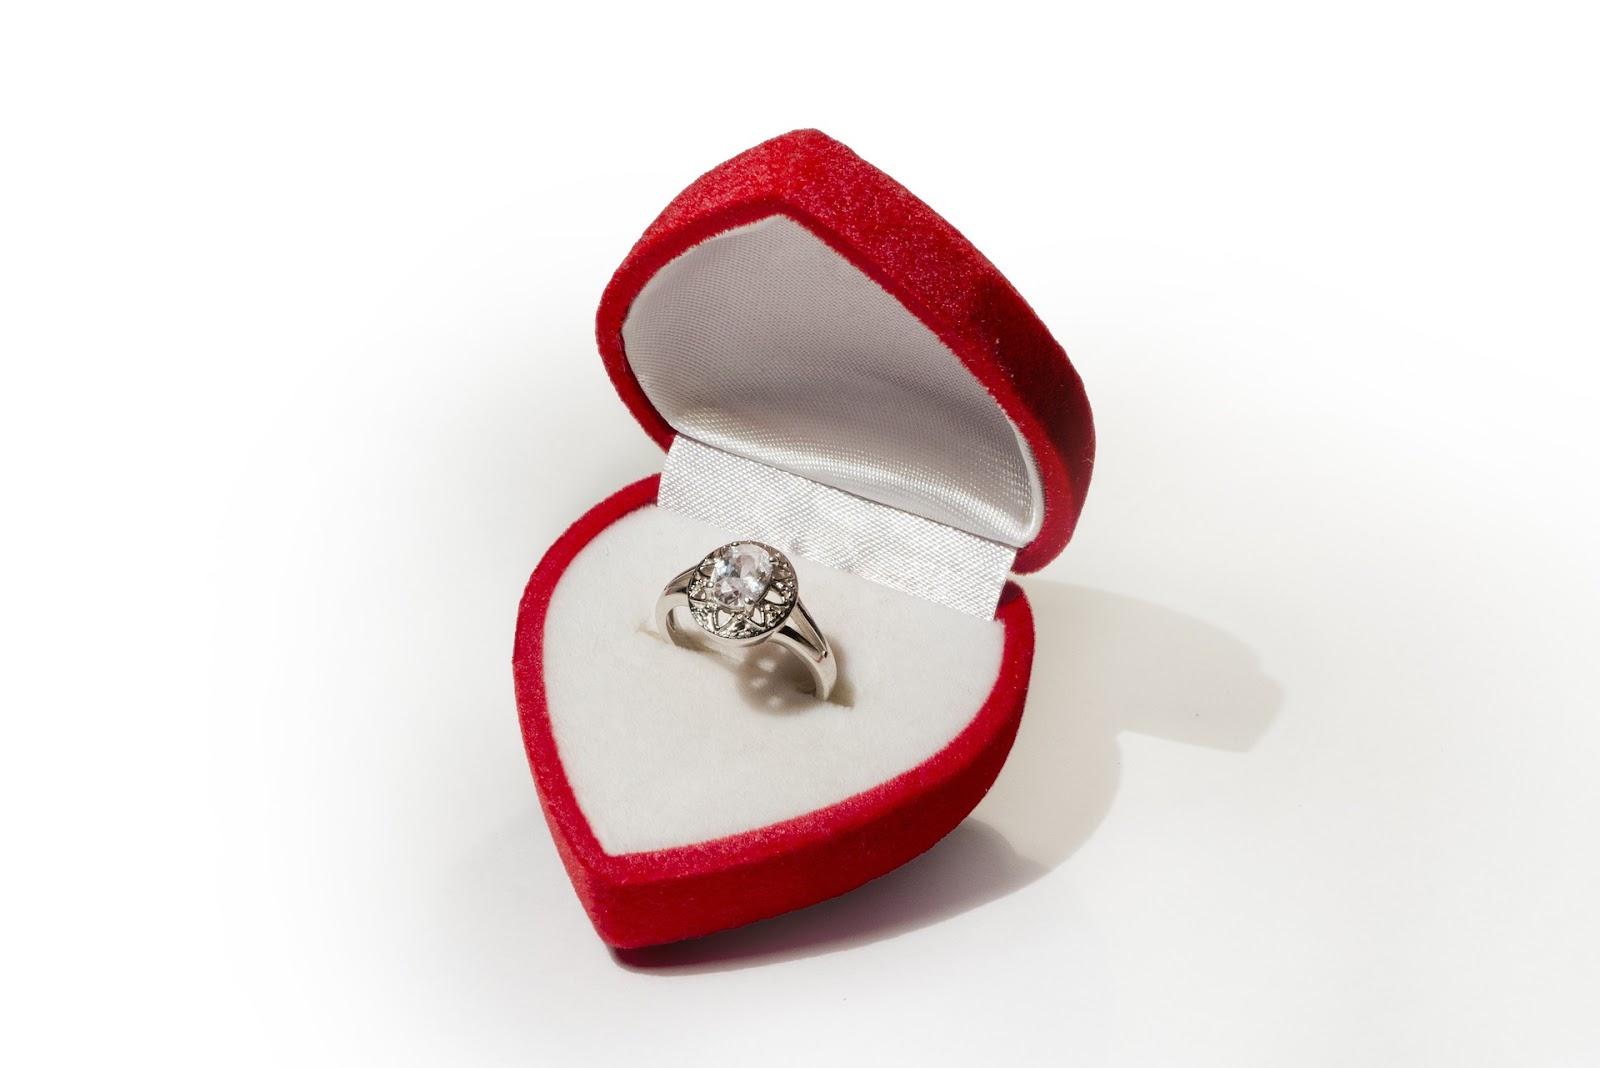 Choosing An Engagement Ring Health Care Considerations